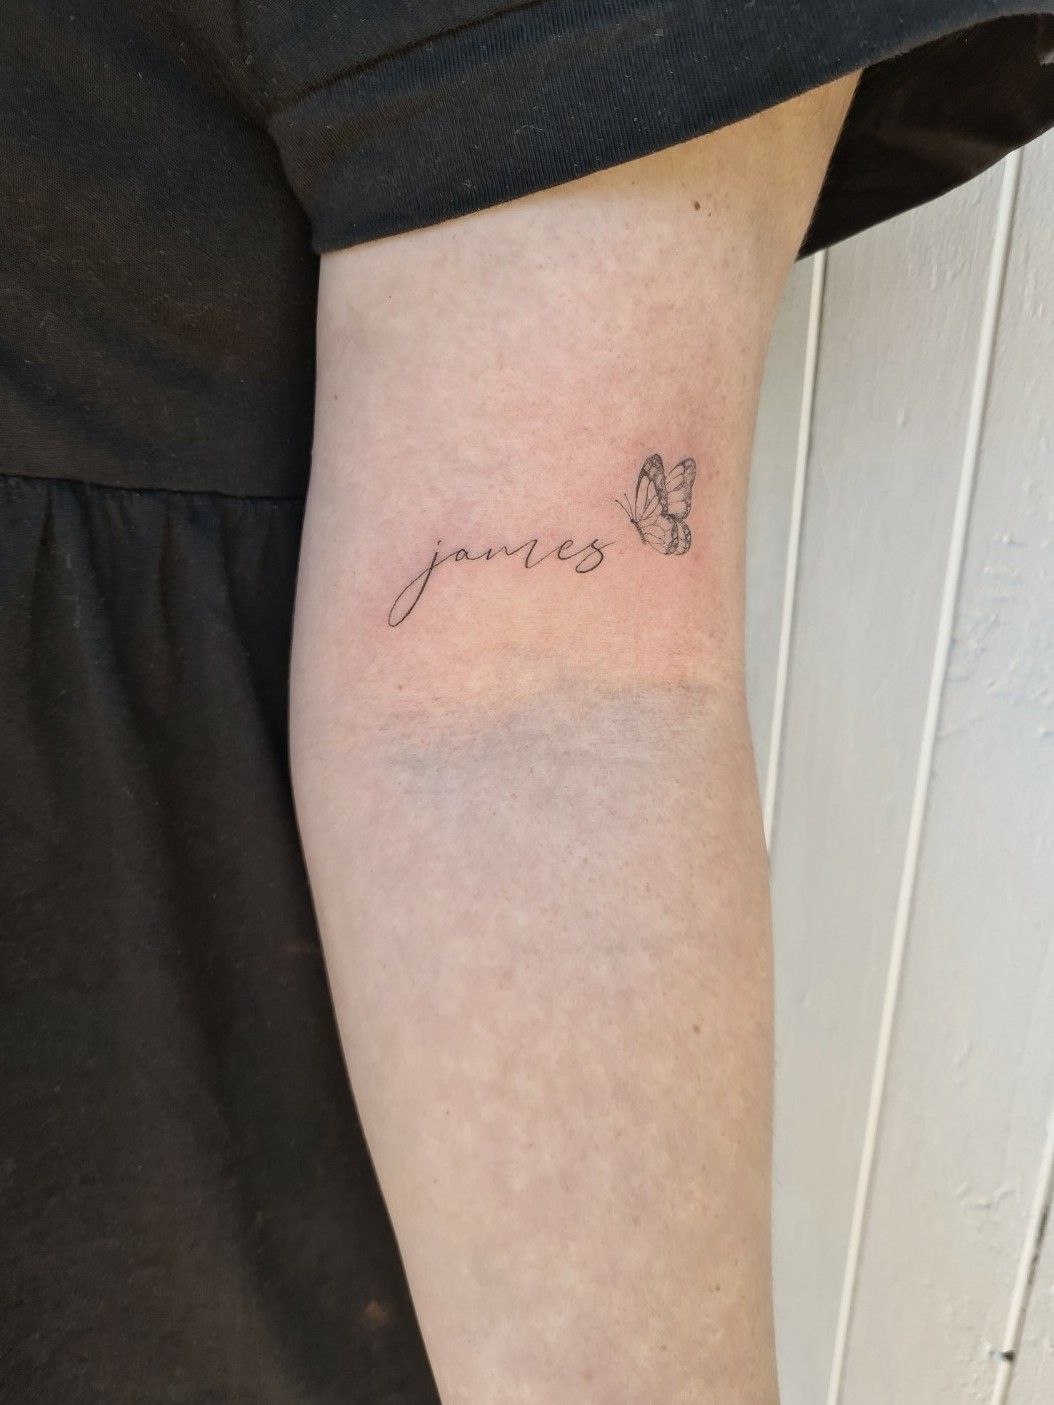 5 friends came in together this week for some cute tattoos  tattoo    TikTok